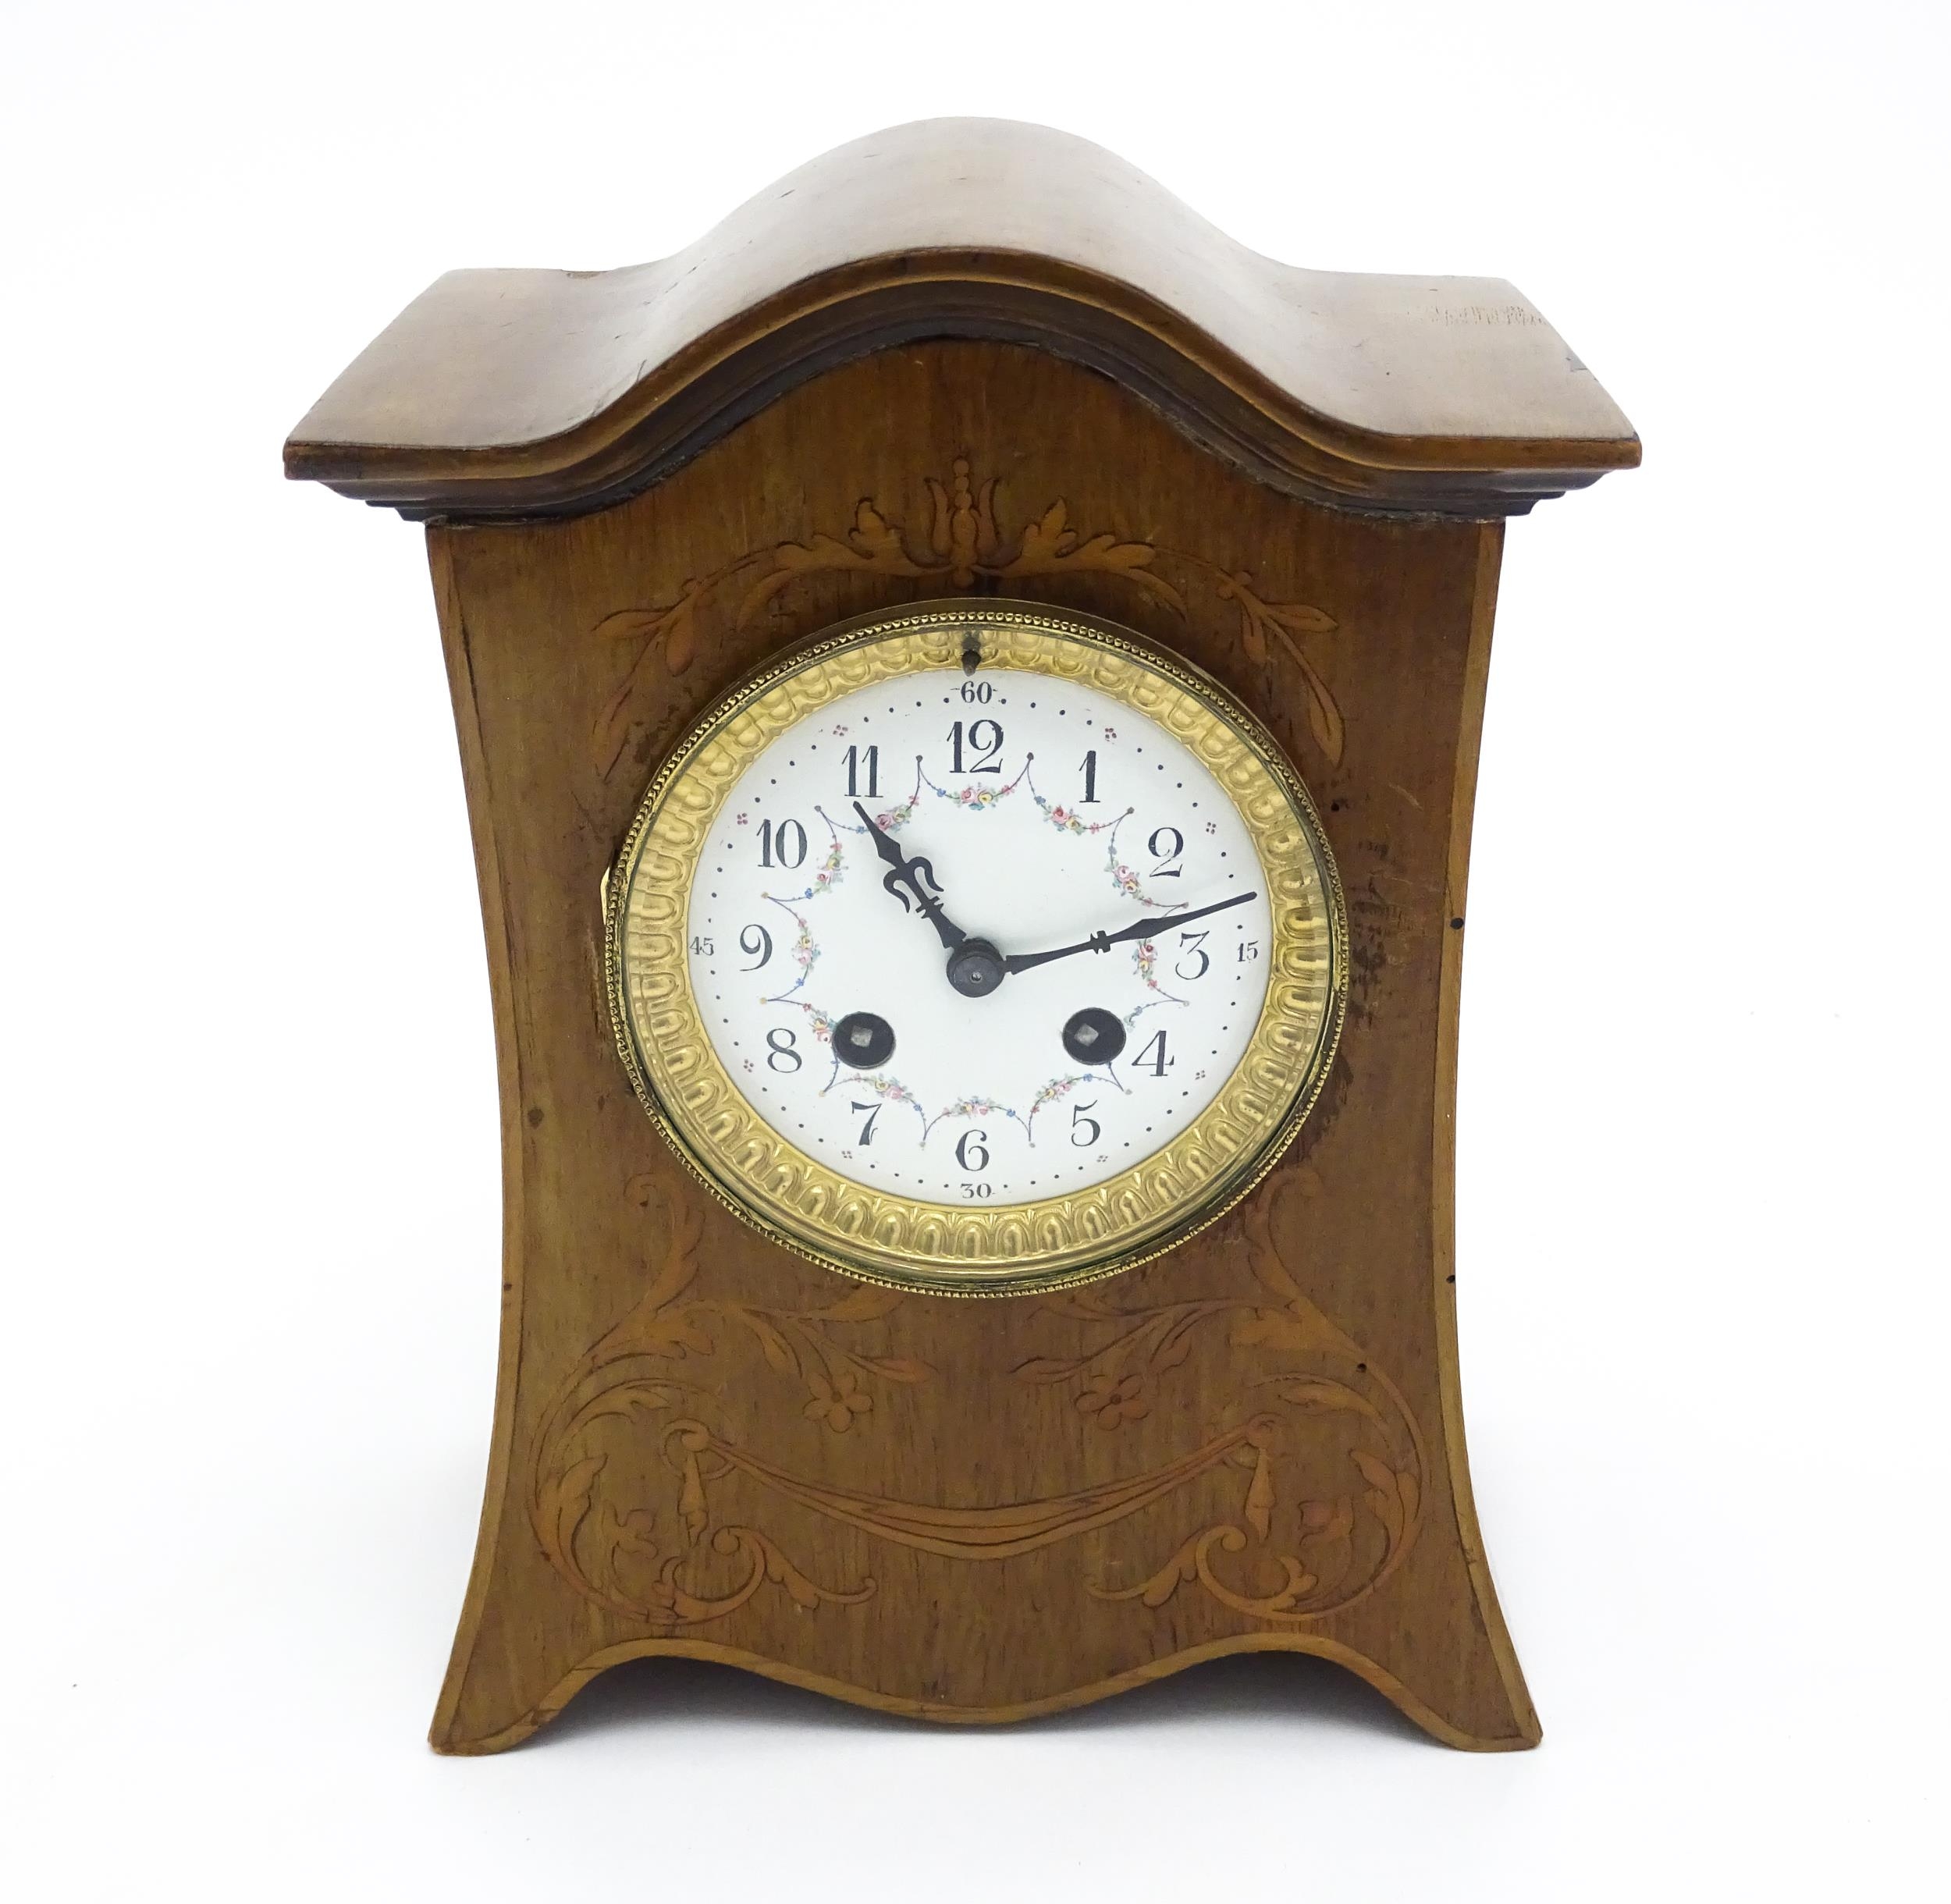 A late 19thC / early 20thC mahogany cased French mantle clock with satinwood inlay and white